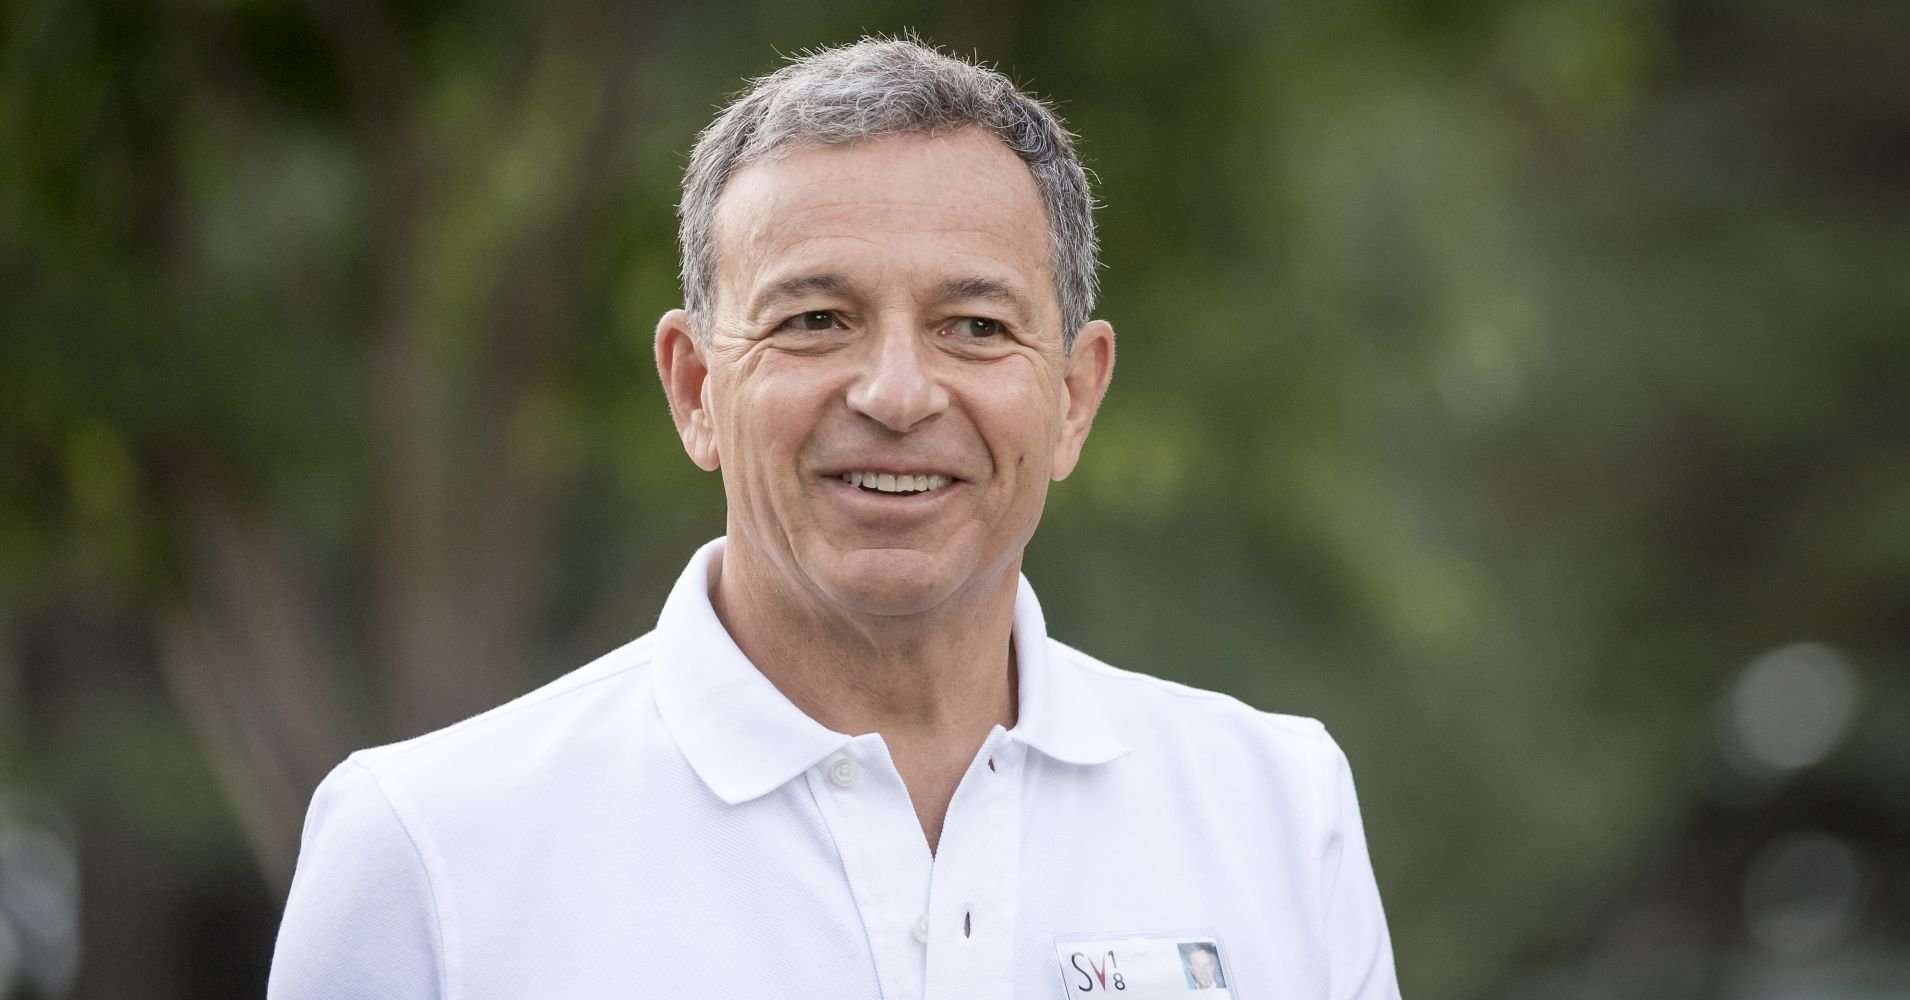 image for Disney CEO Bob Iger says he will step down in 2021, a succession plan is forming